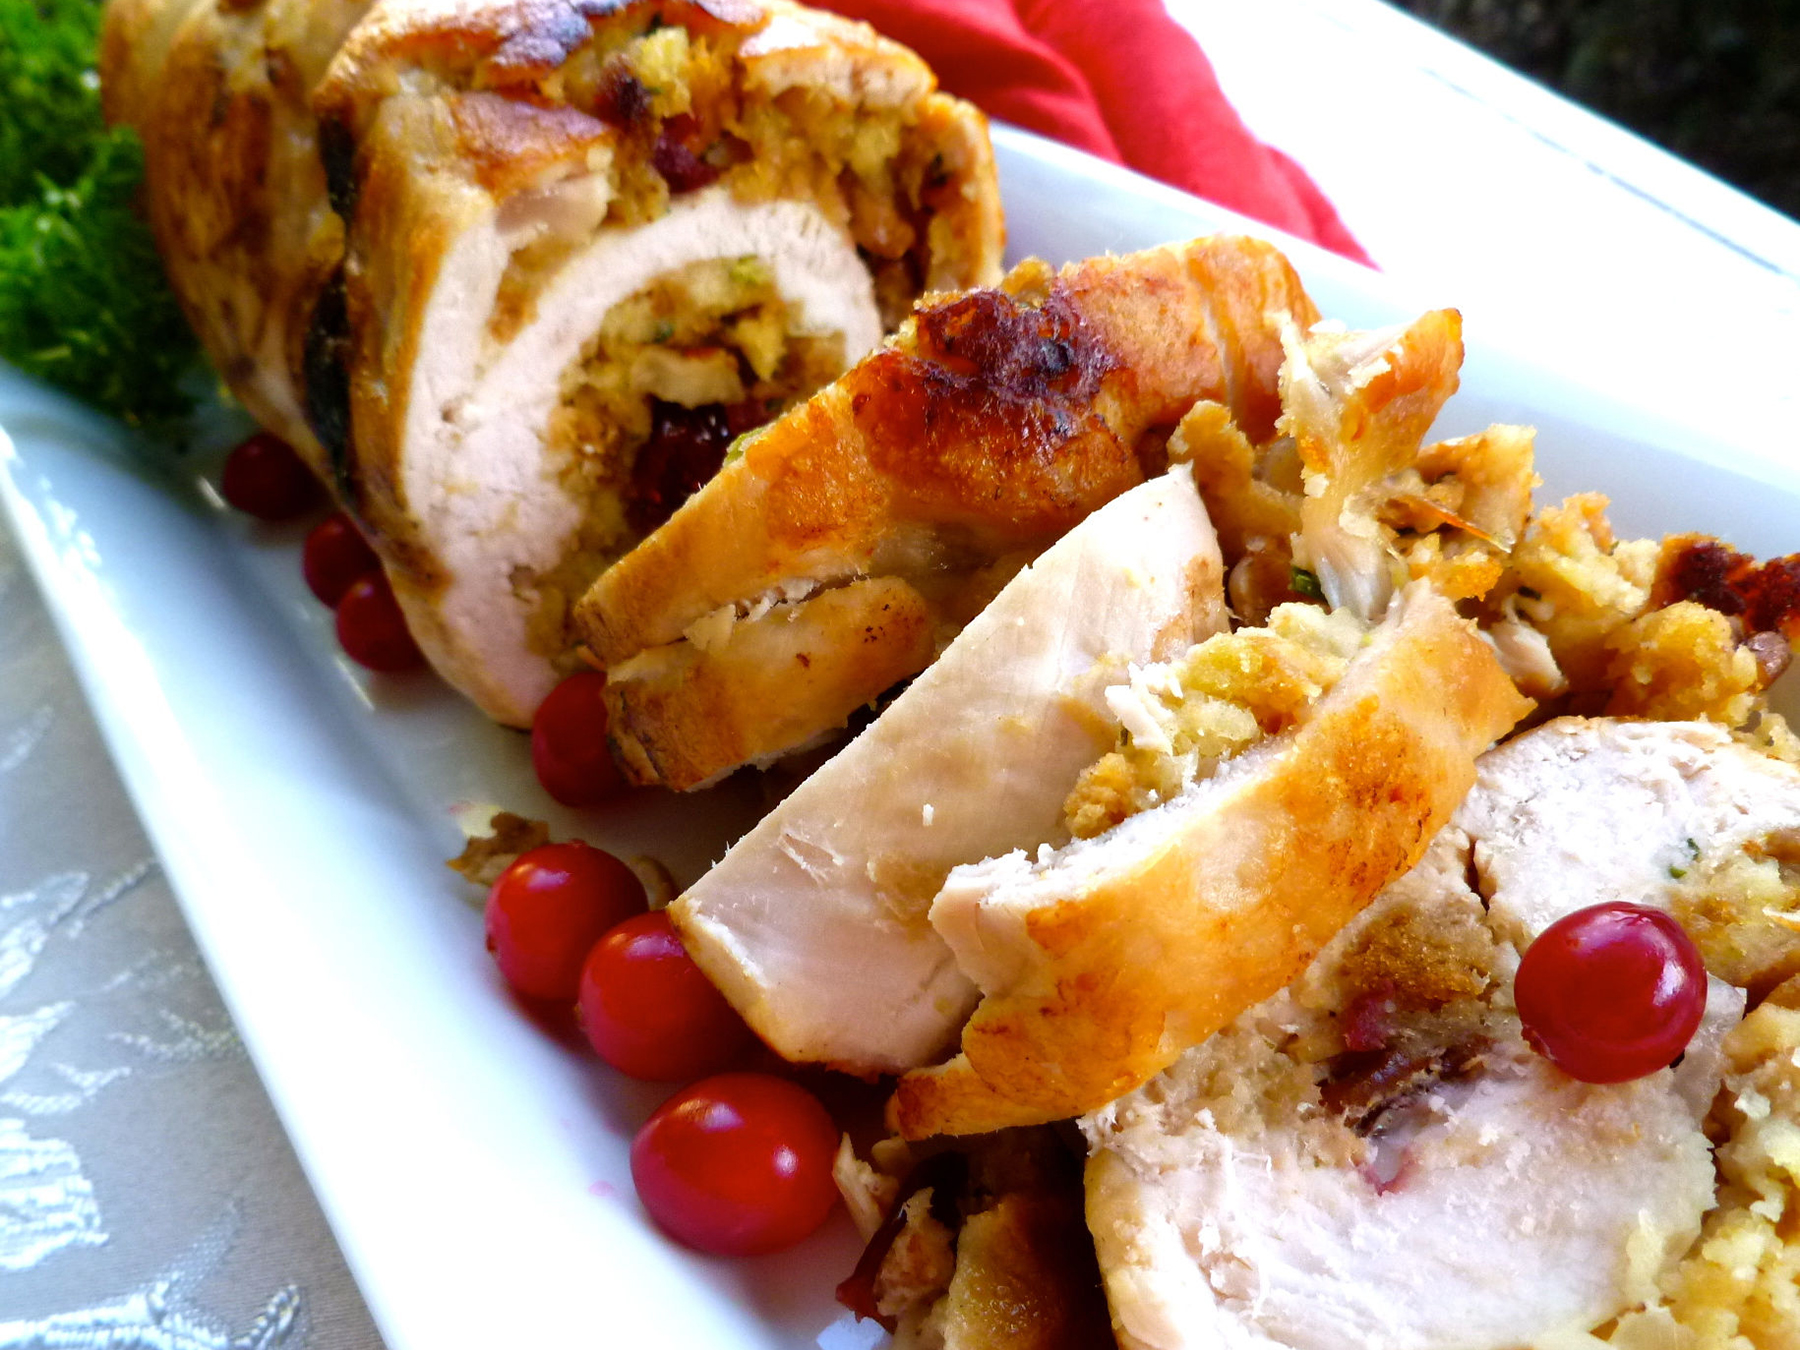 close up view of a sliced Cranberry Stuffed Turkey Breast roll garnished with fresh cranberries on a white platter